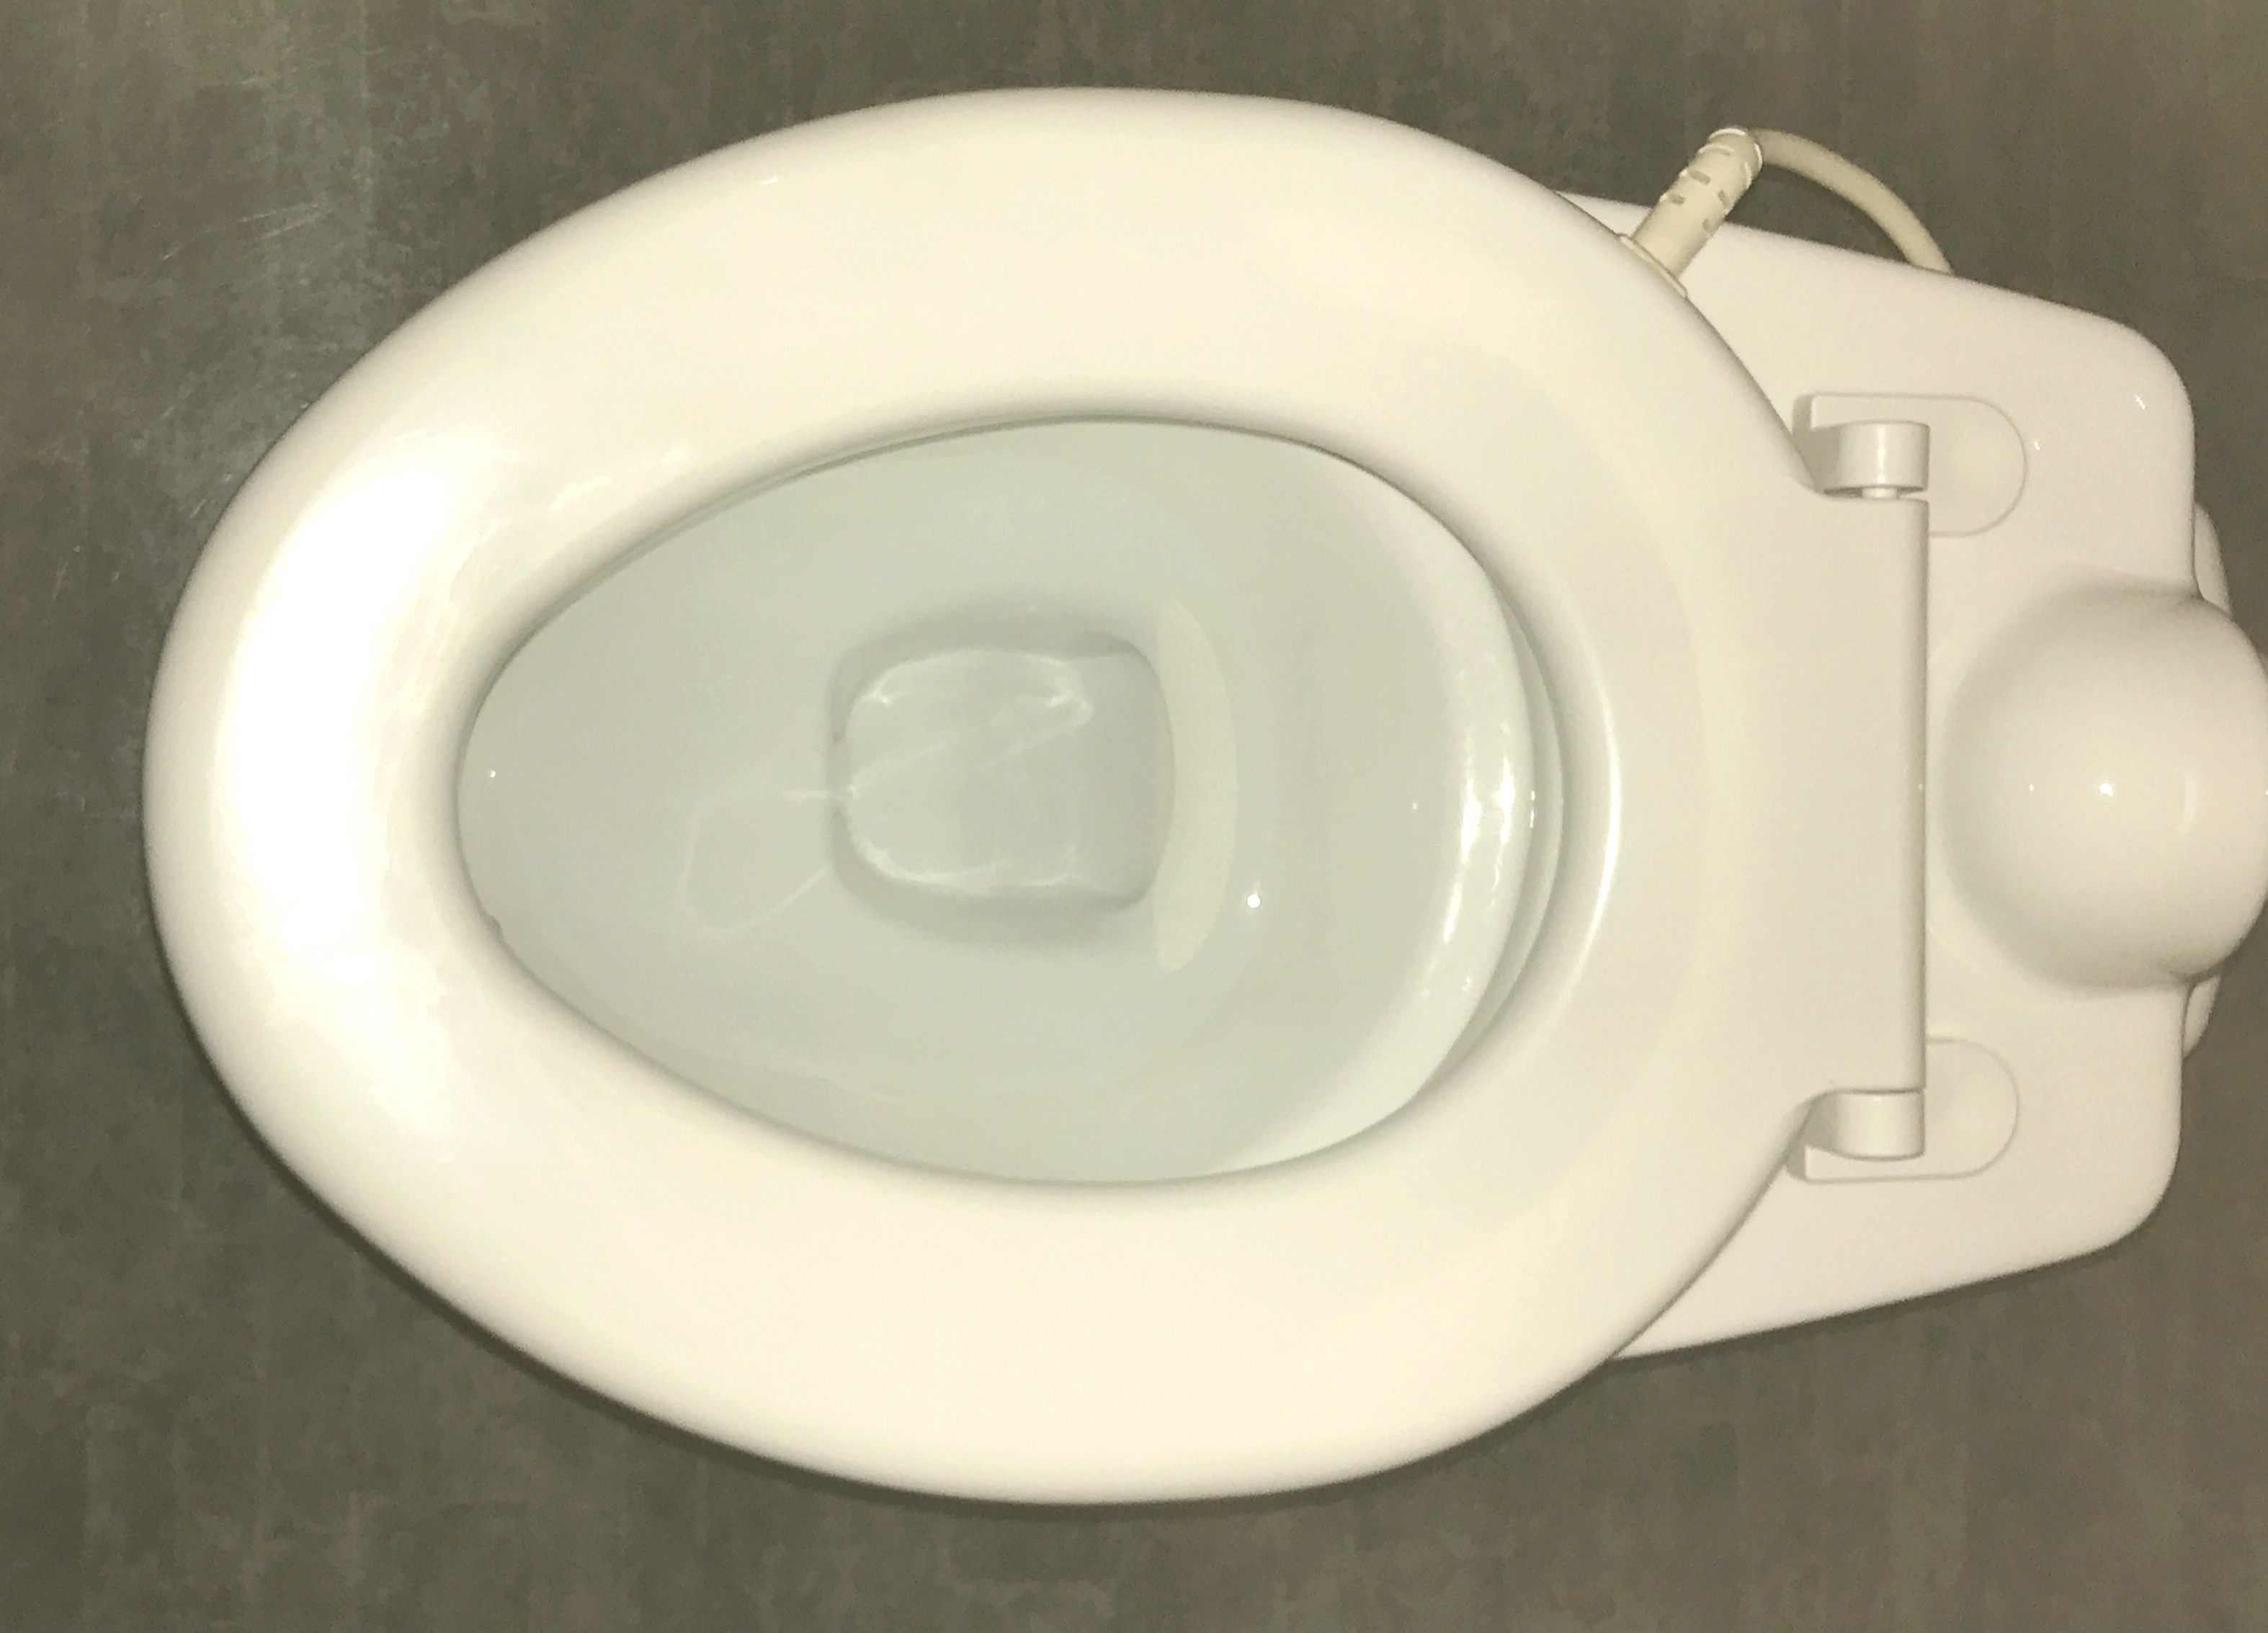 poop and flush in the kids toilet